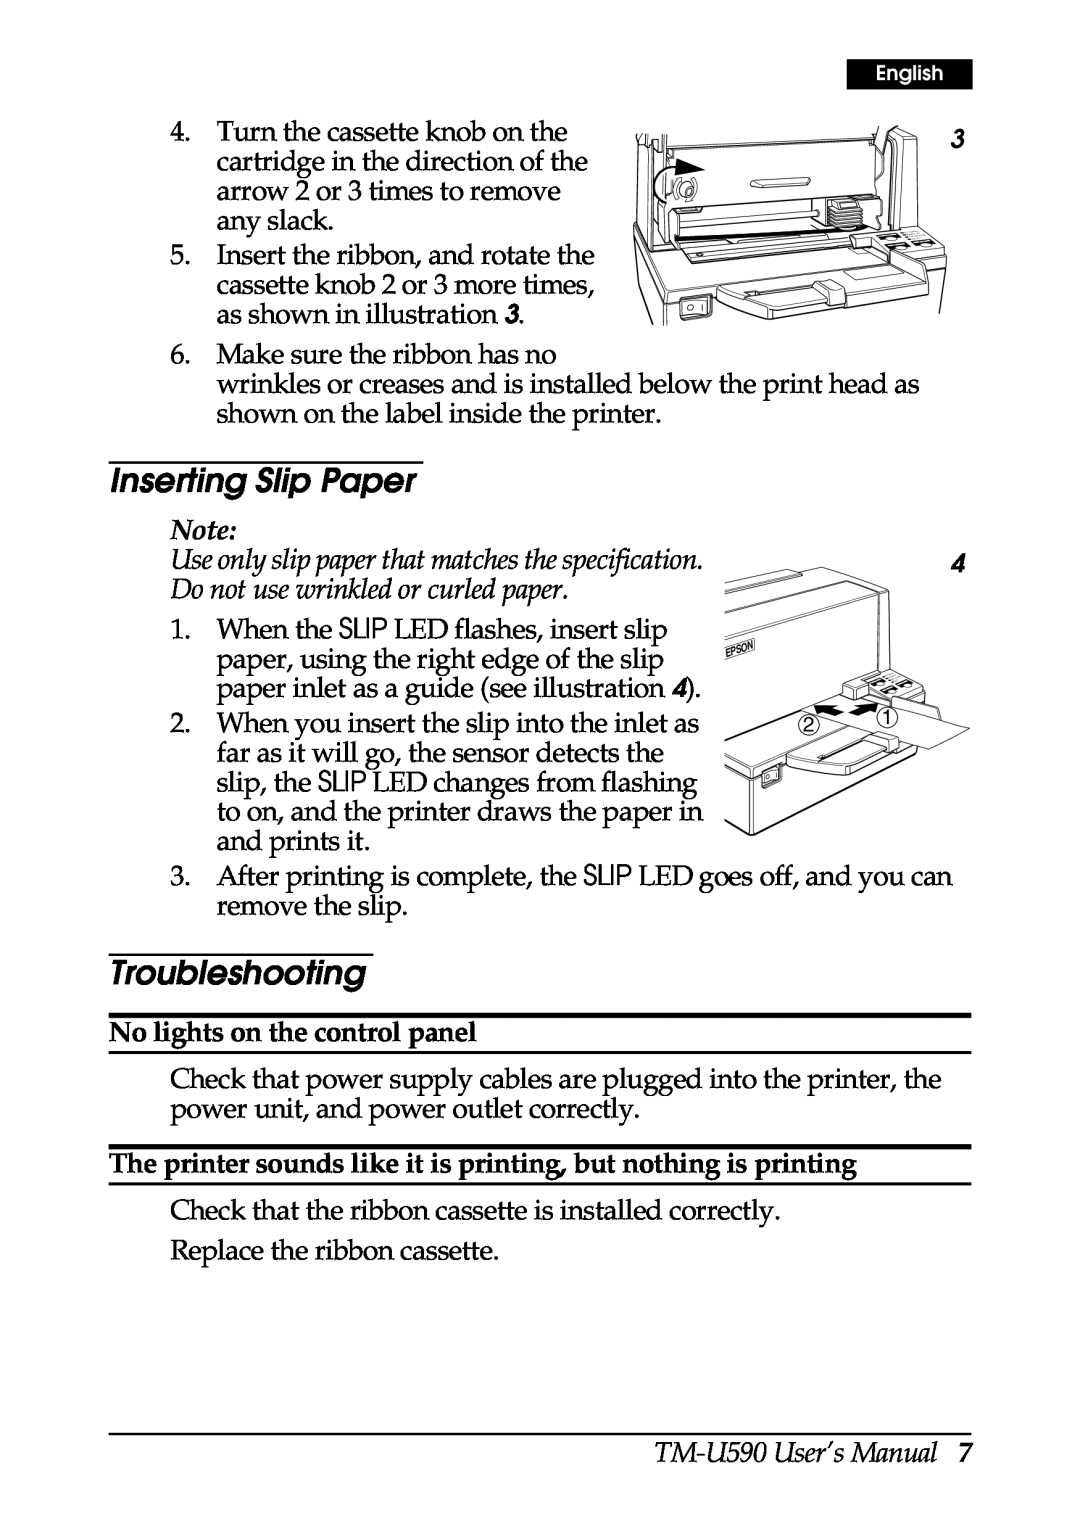 FARGO electronic TM-U590 Inserting Slip Paper, Troubleshooting, Do not use wrinkled or curled paper, and prints it 